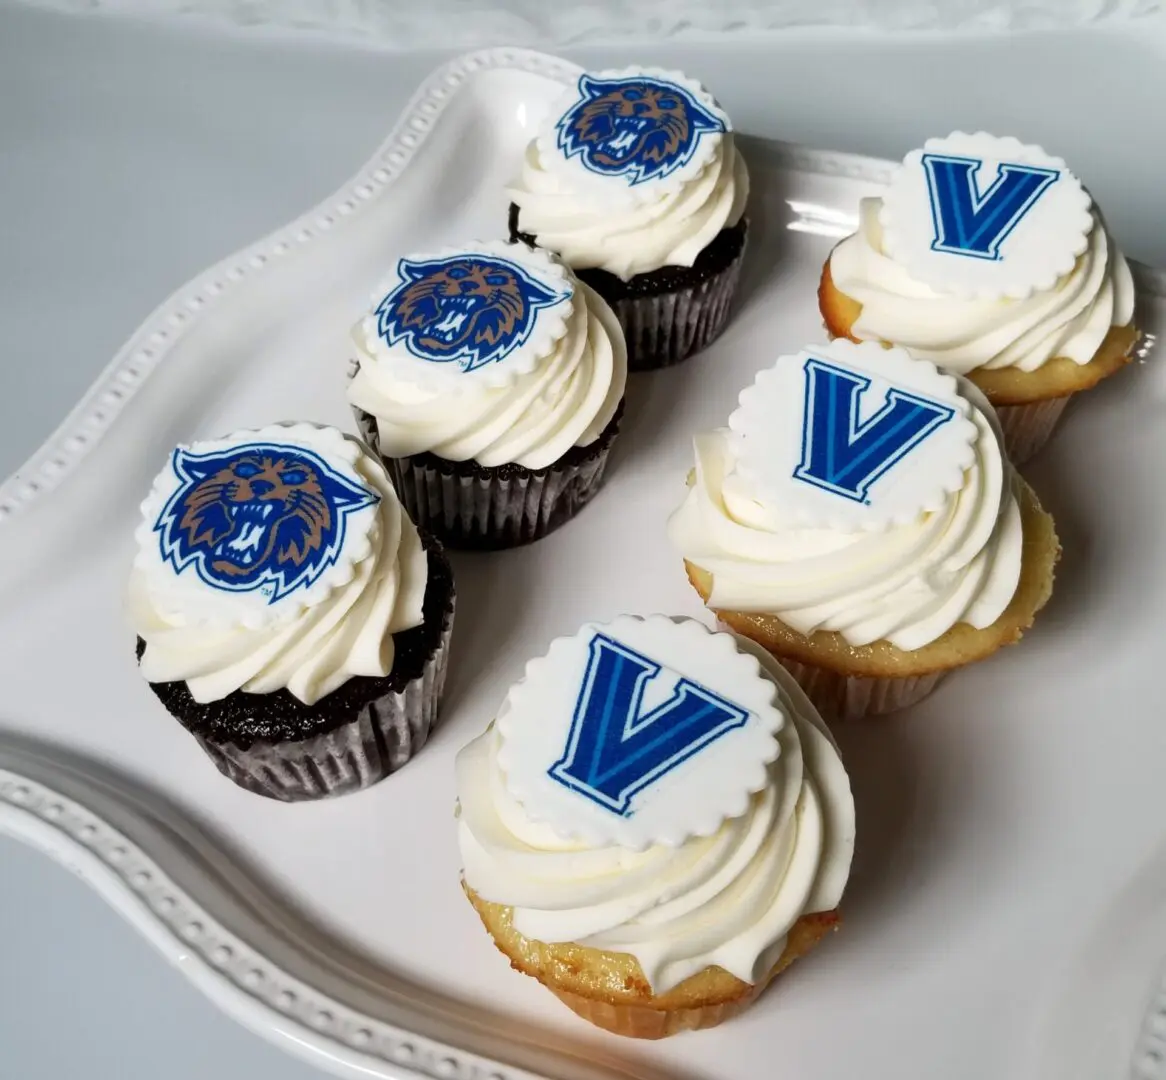 Six lion and V topping decorated Cupcakes